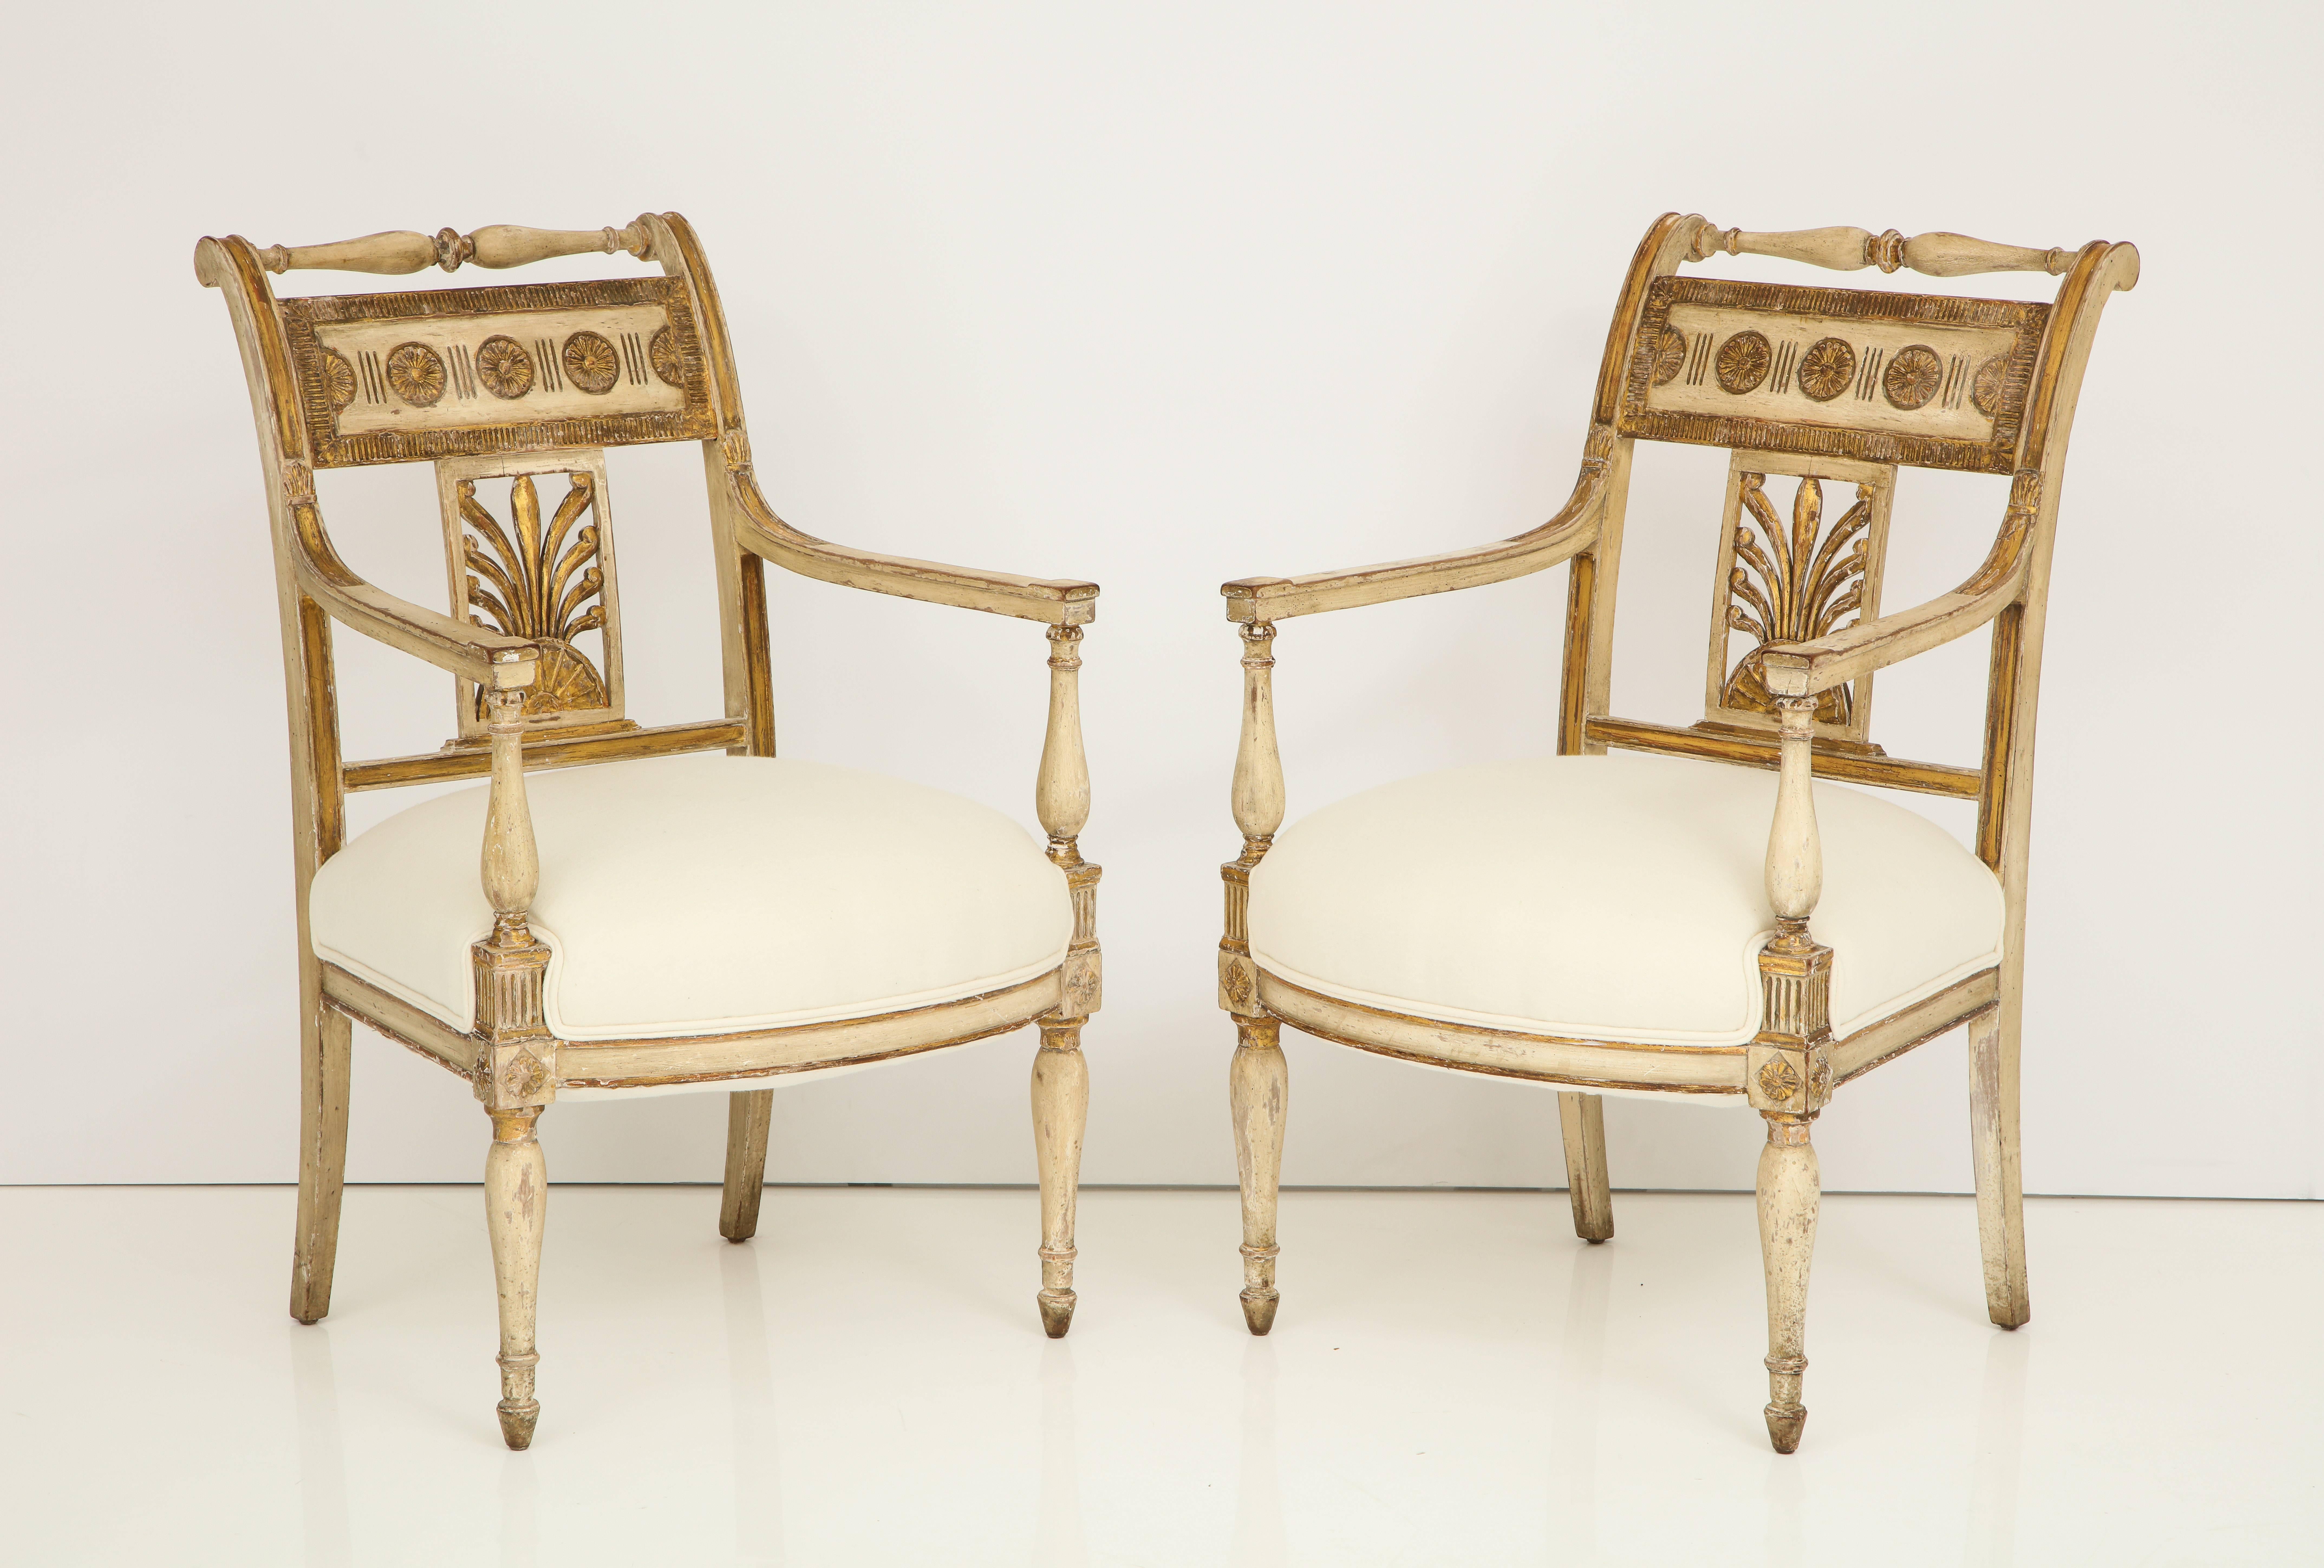 Hand-Carved Pair of Italian Painted and Gilded Empire Period Armchairs